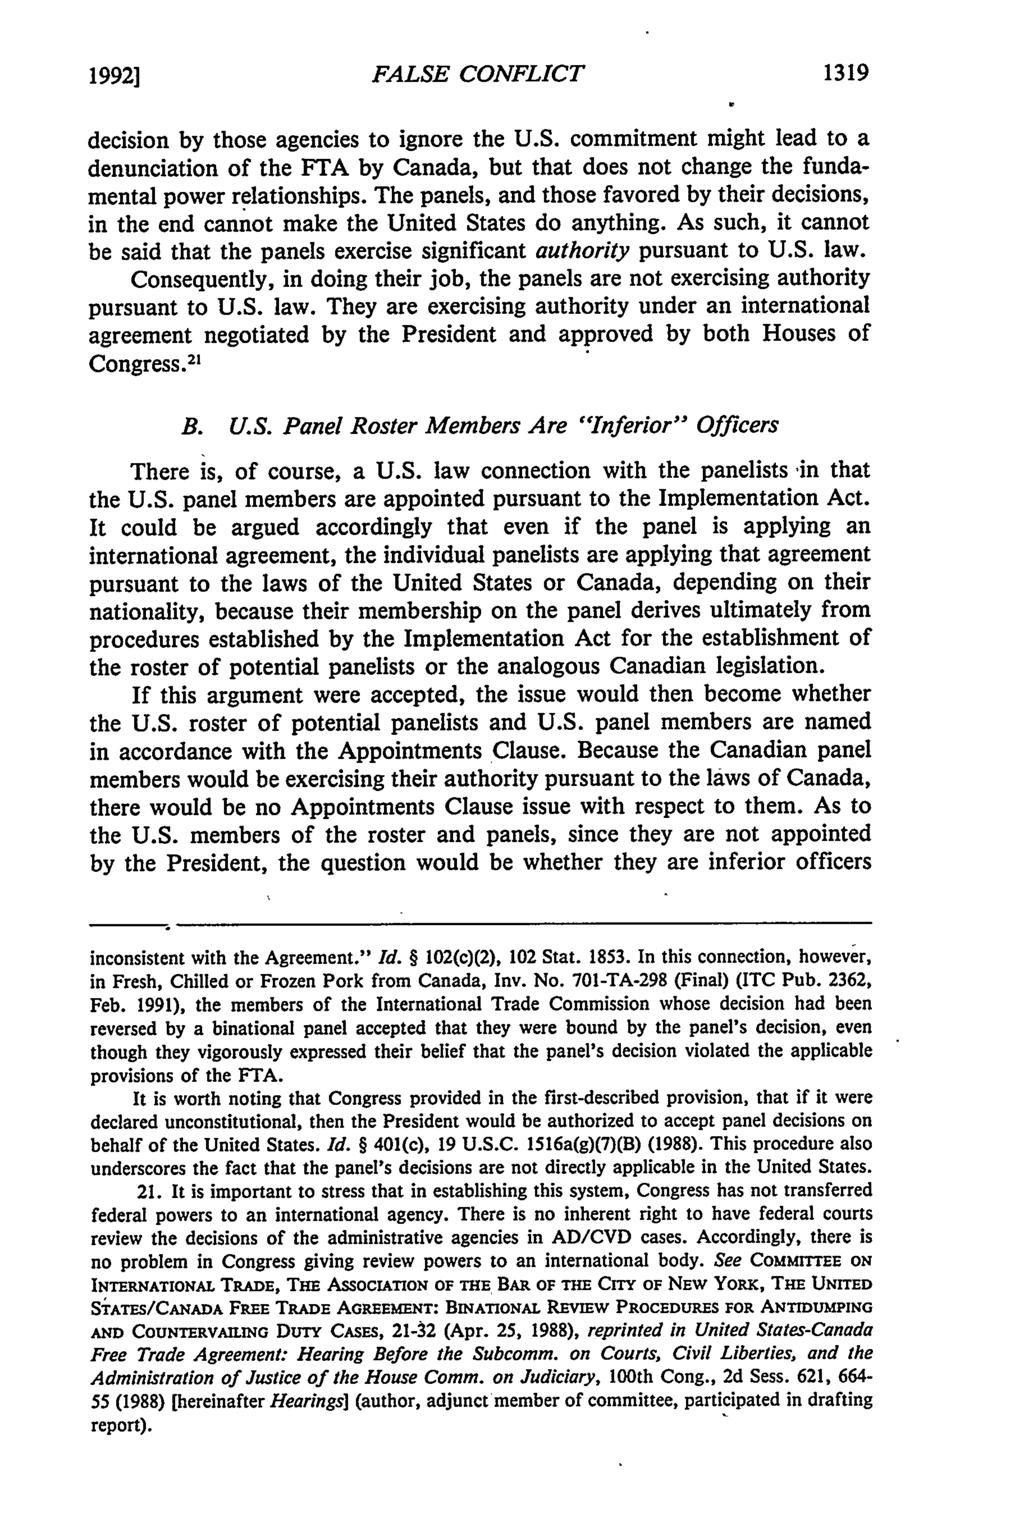 1992] FALSE CONFLICT 1319 decision by those agencies to ignore the U.S. commitment might lead to a denunciation of the FTA by Canada, but that does not change the fundamental power relationships.